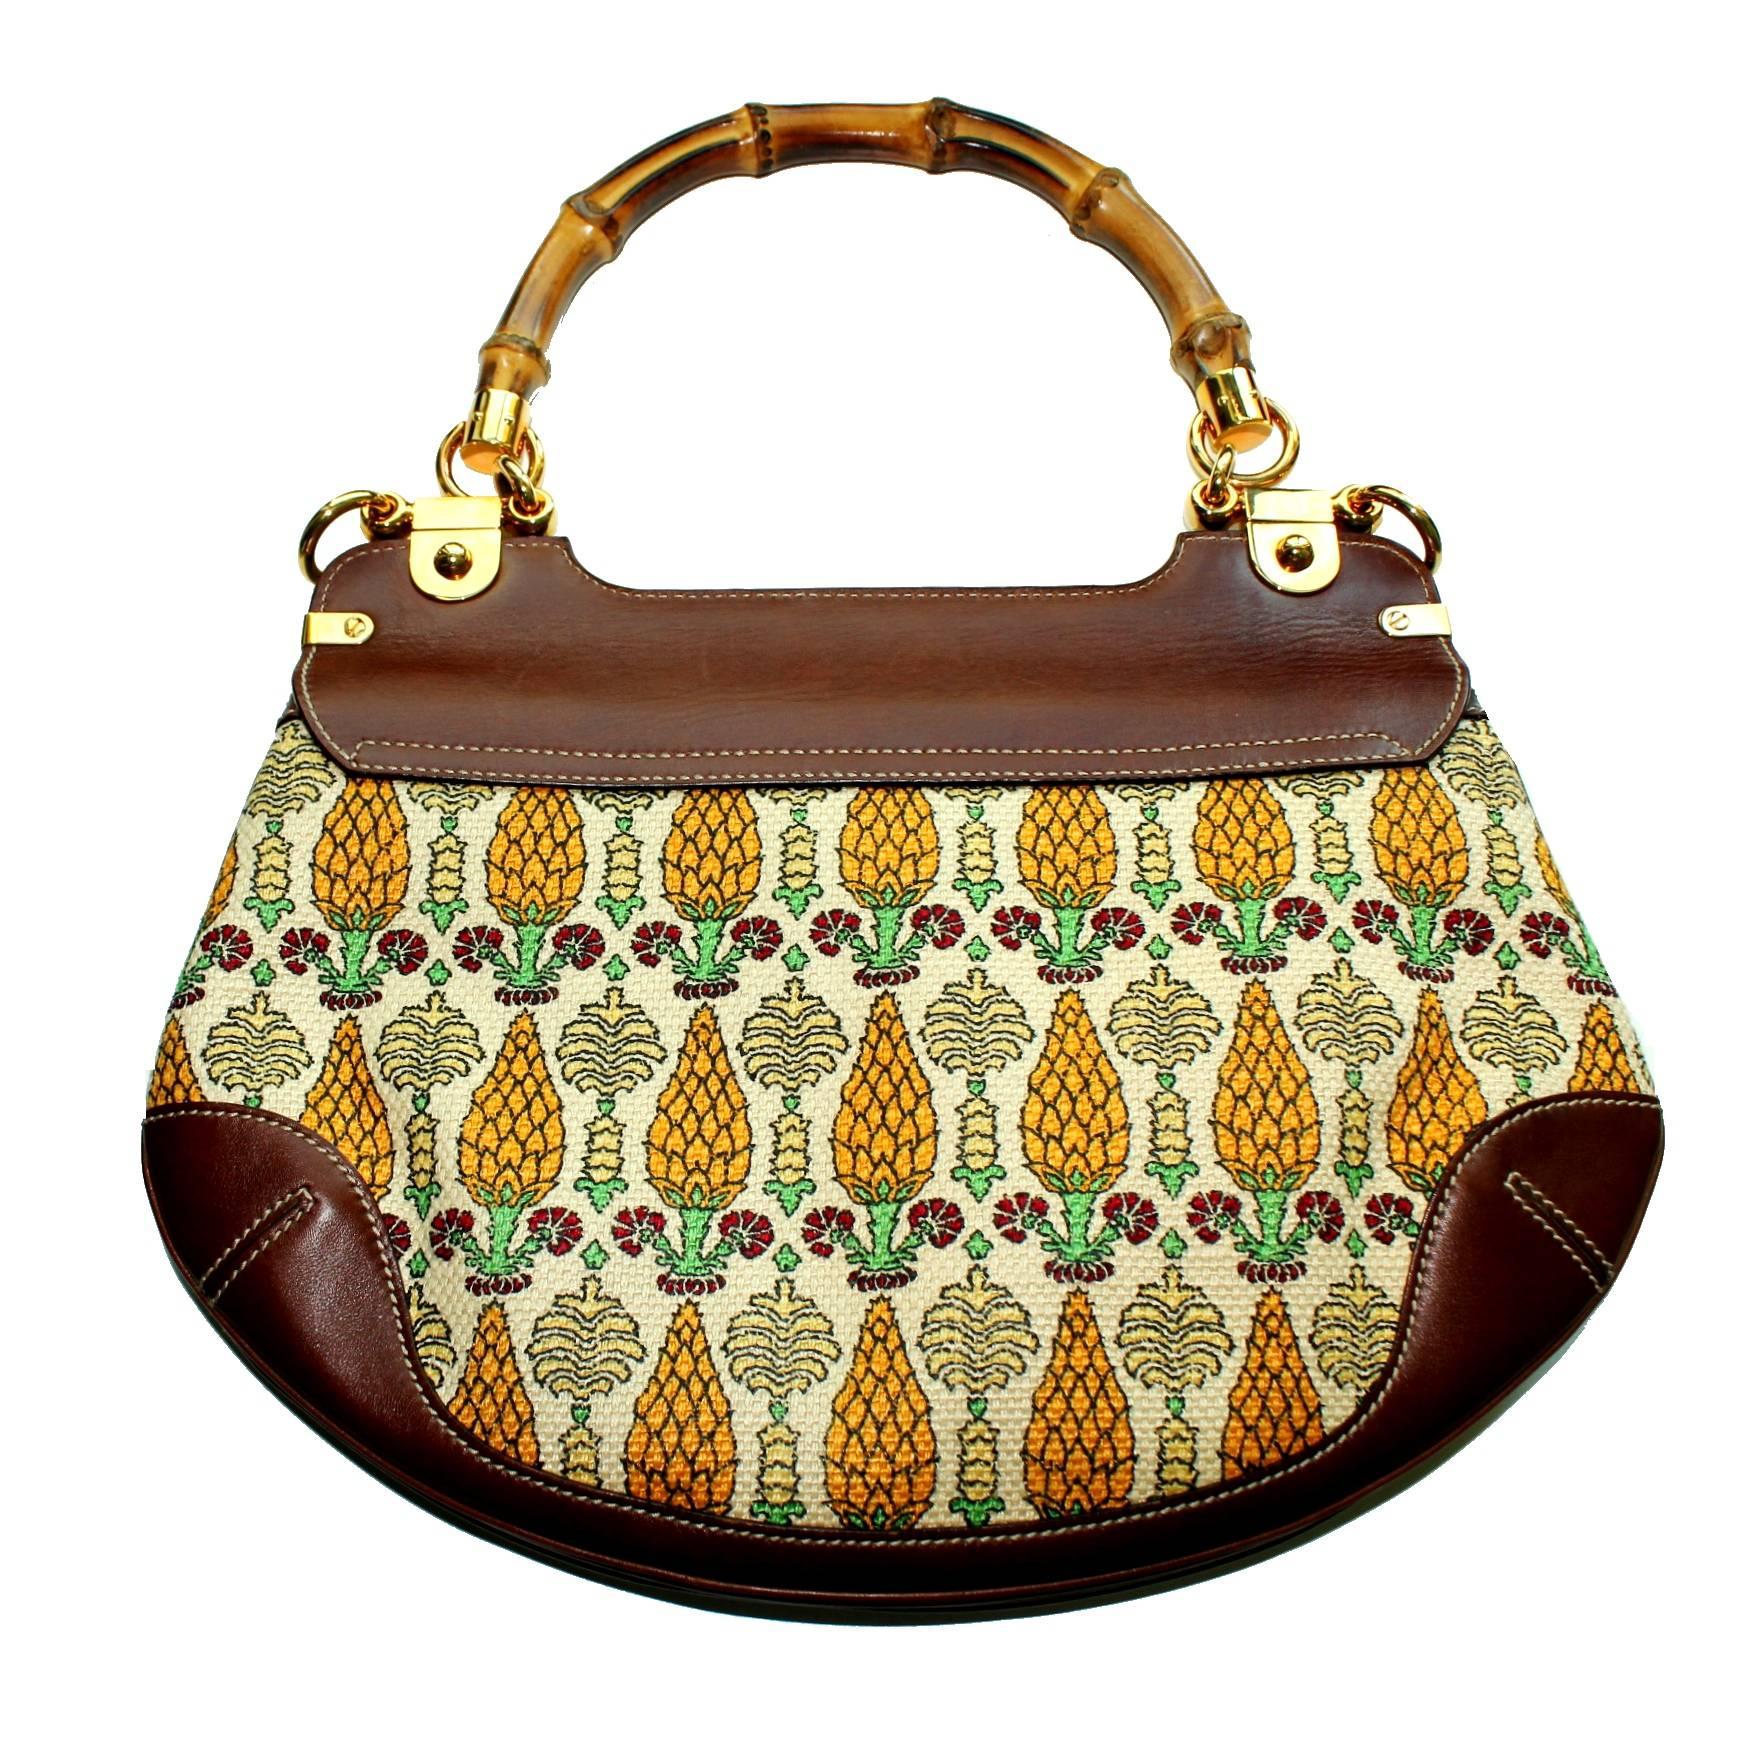 A signature bag by Gucci in the famous "Pigna" print with pineapple cones
Trimmed with finest brown leather
Gold-colored hardware and decorative studs
Bamboo handle and closure
Fully lined with fabric
Detachable shoulder strap